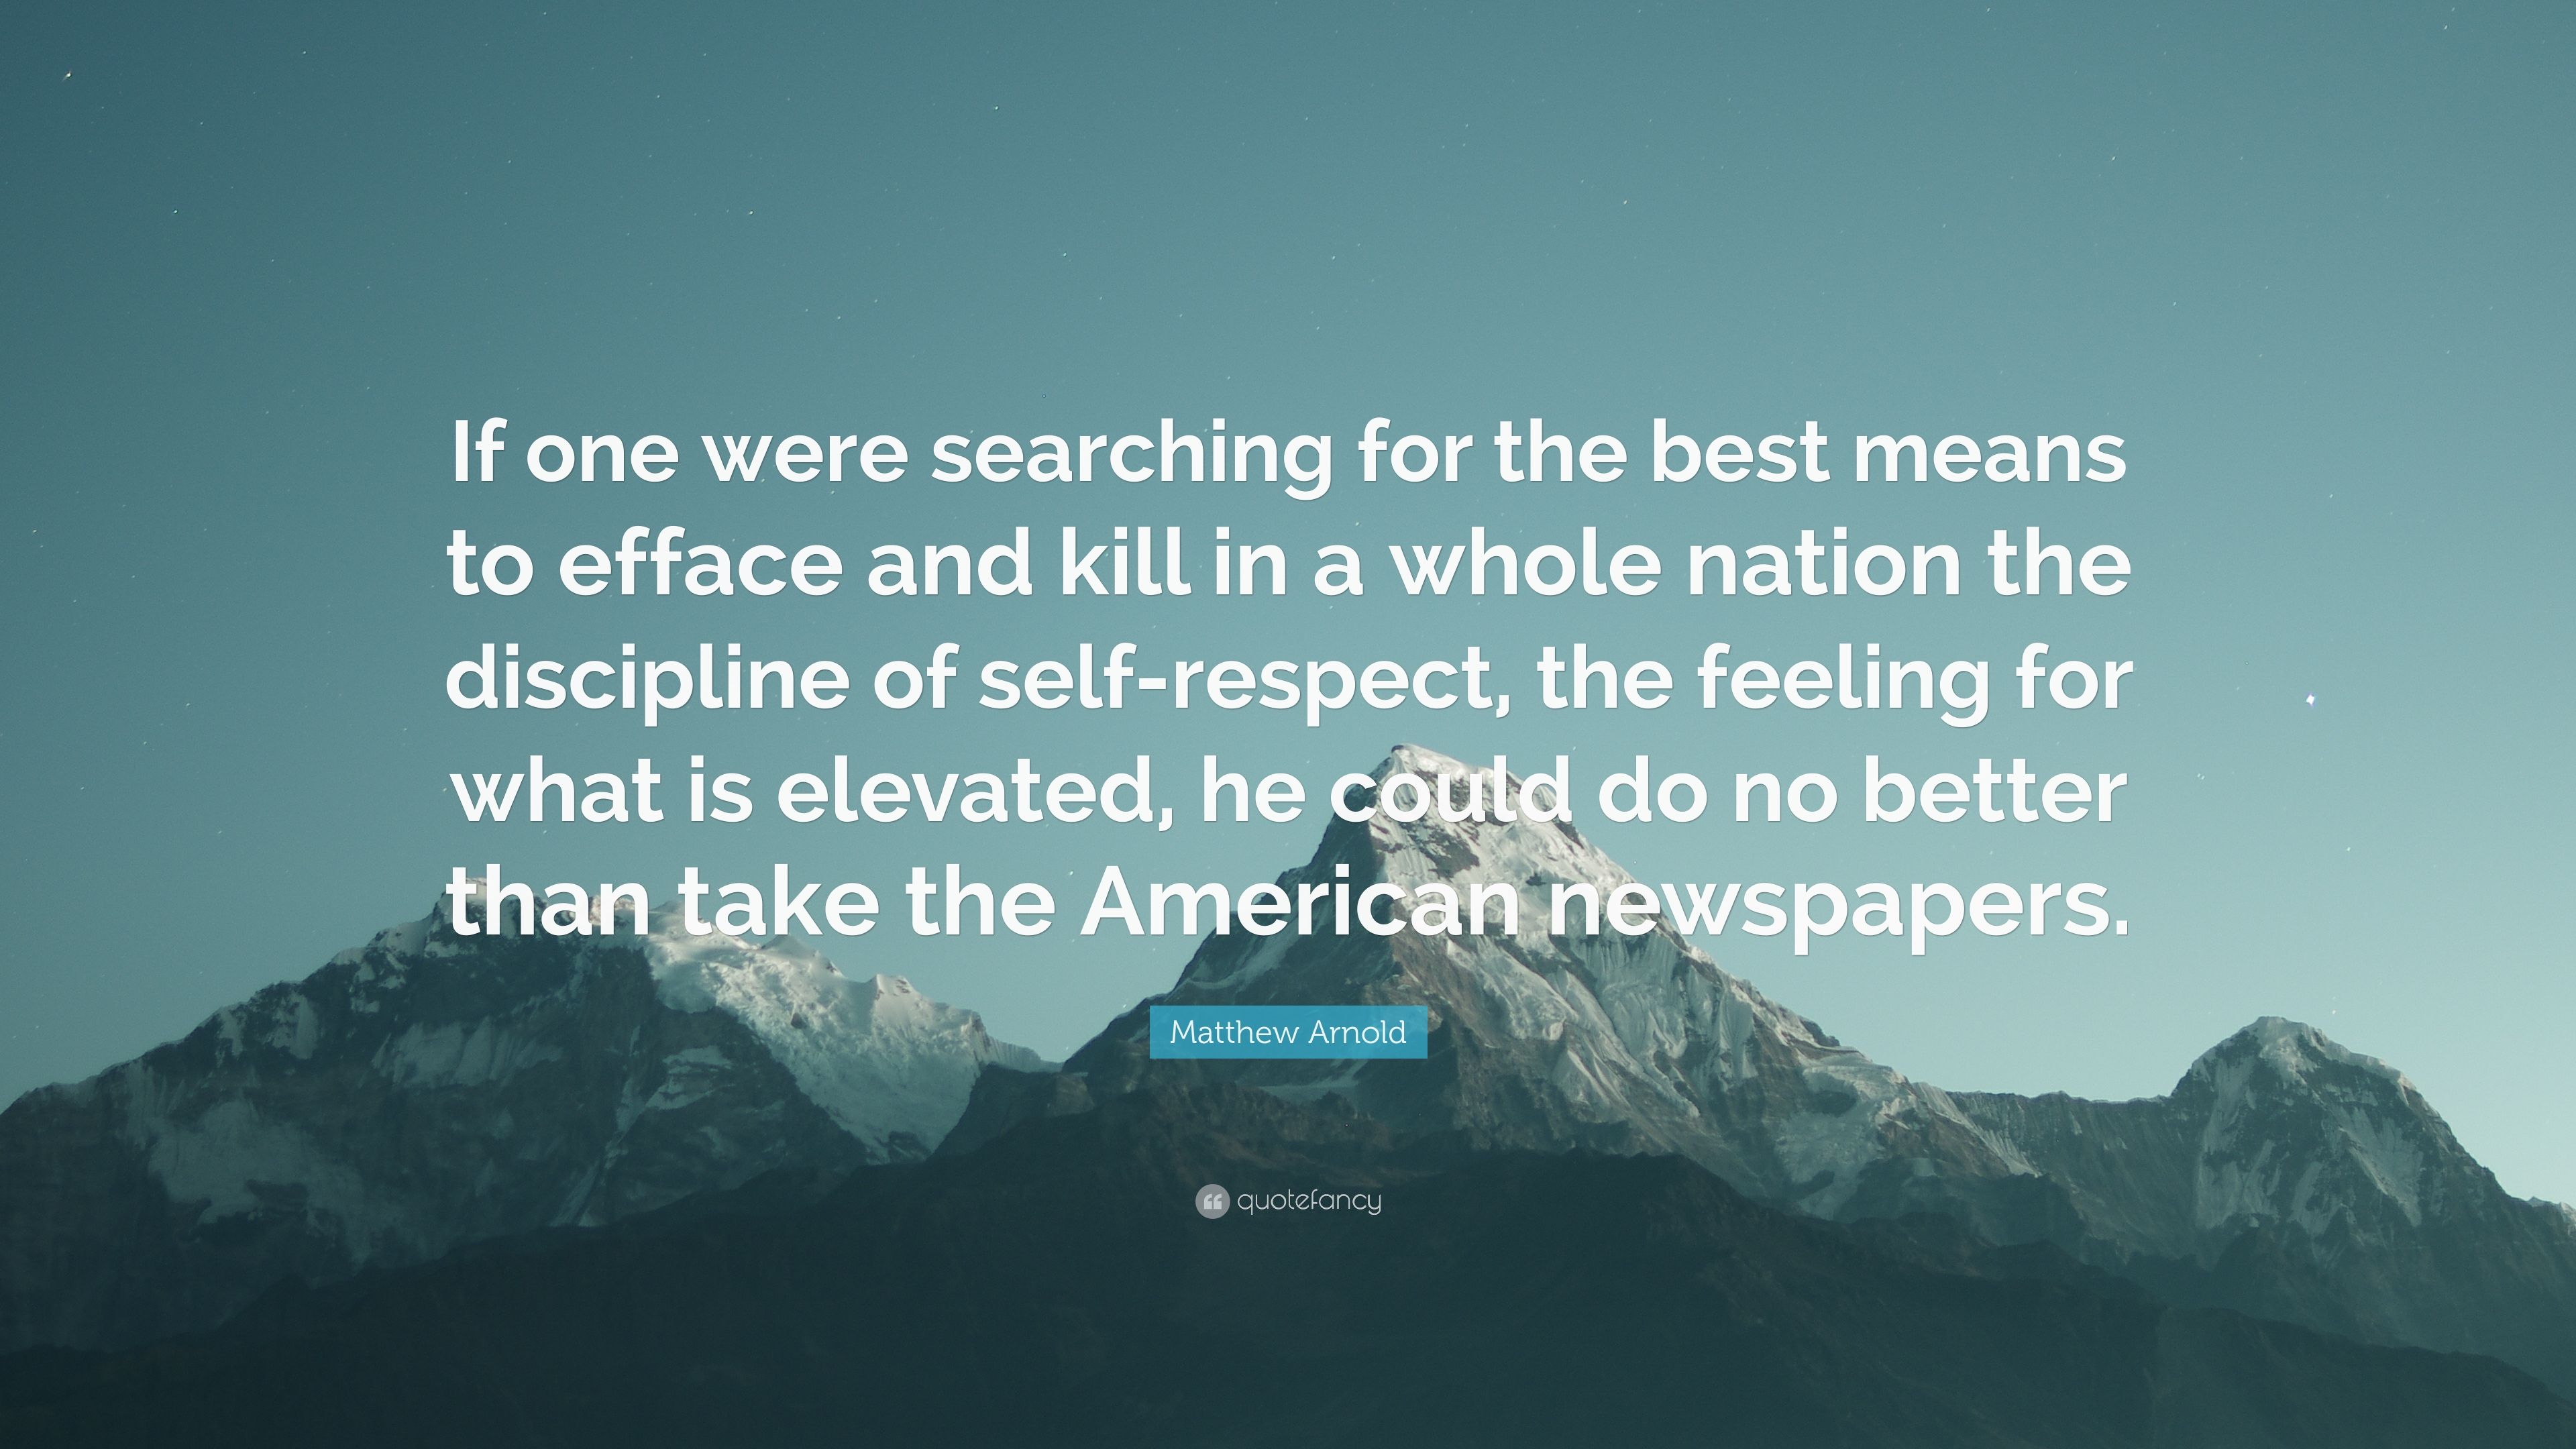 Matthew Arnold Quote: “If One Were Searching For The Best Means To Efface And Kill In A Whole Nation The Discipline Of Self Respect, The Feelin.” (7 Wallpaper)